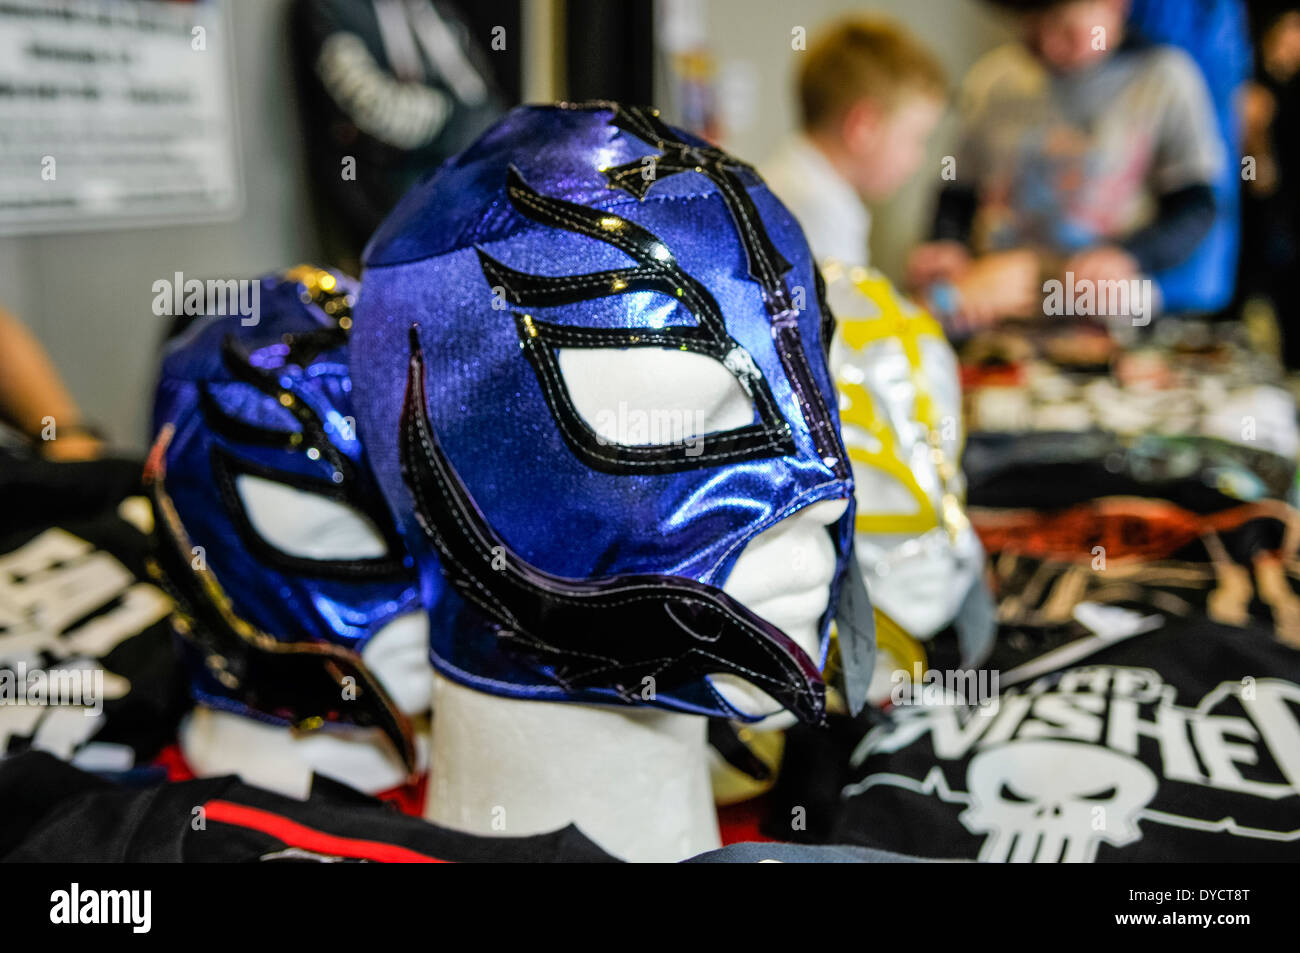 Mexican wrestler masks on sale at a sci-fi convention Stock Photo